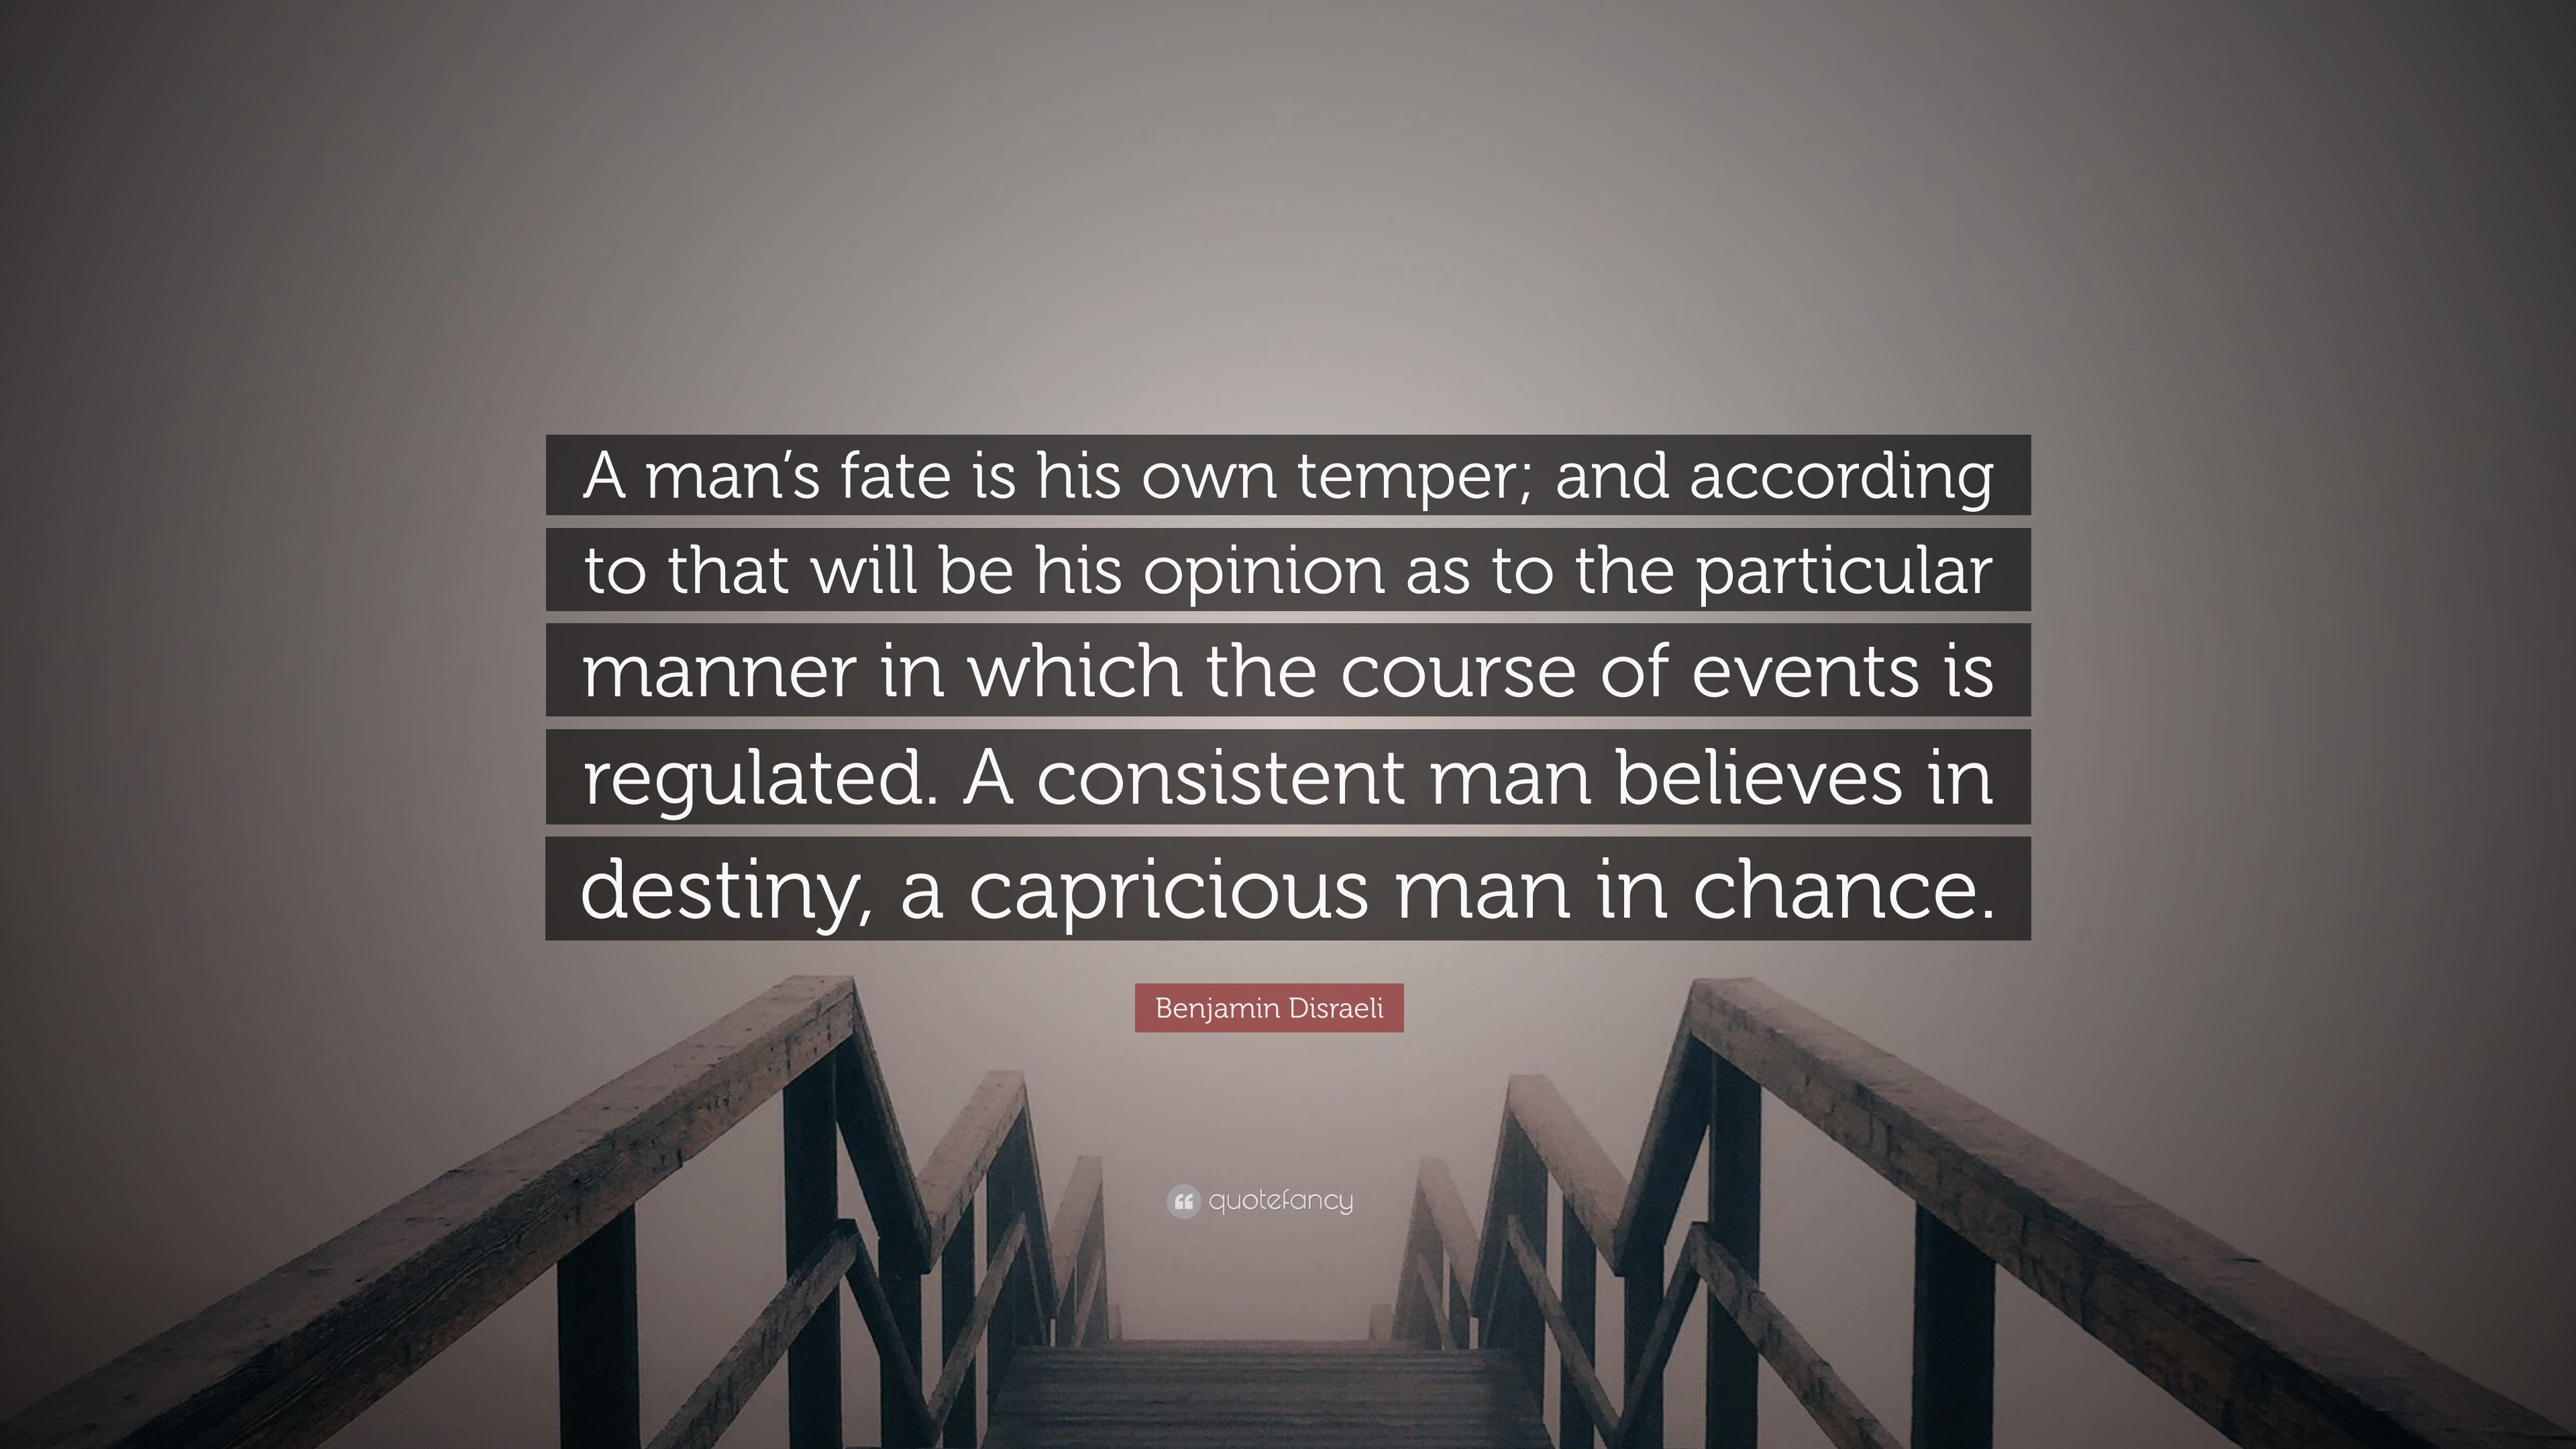 man is the architect of his own fate quotes